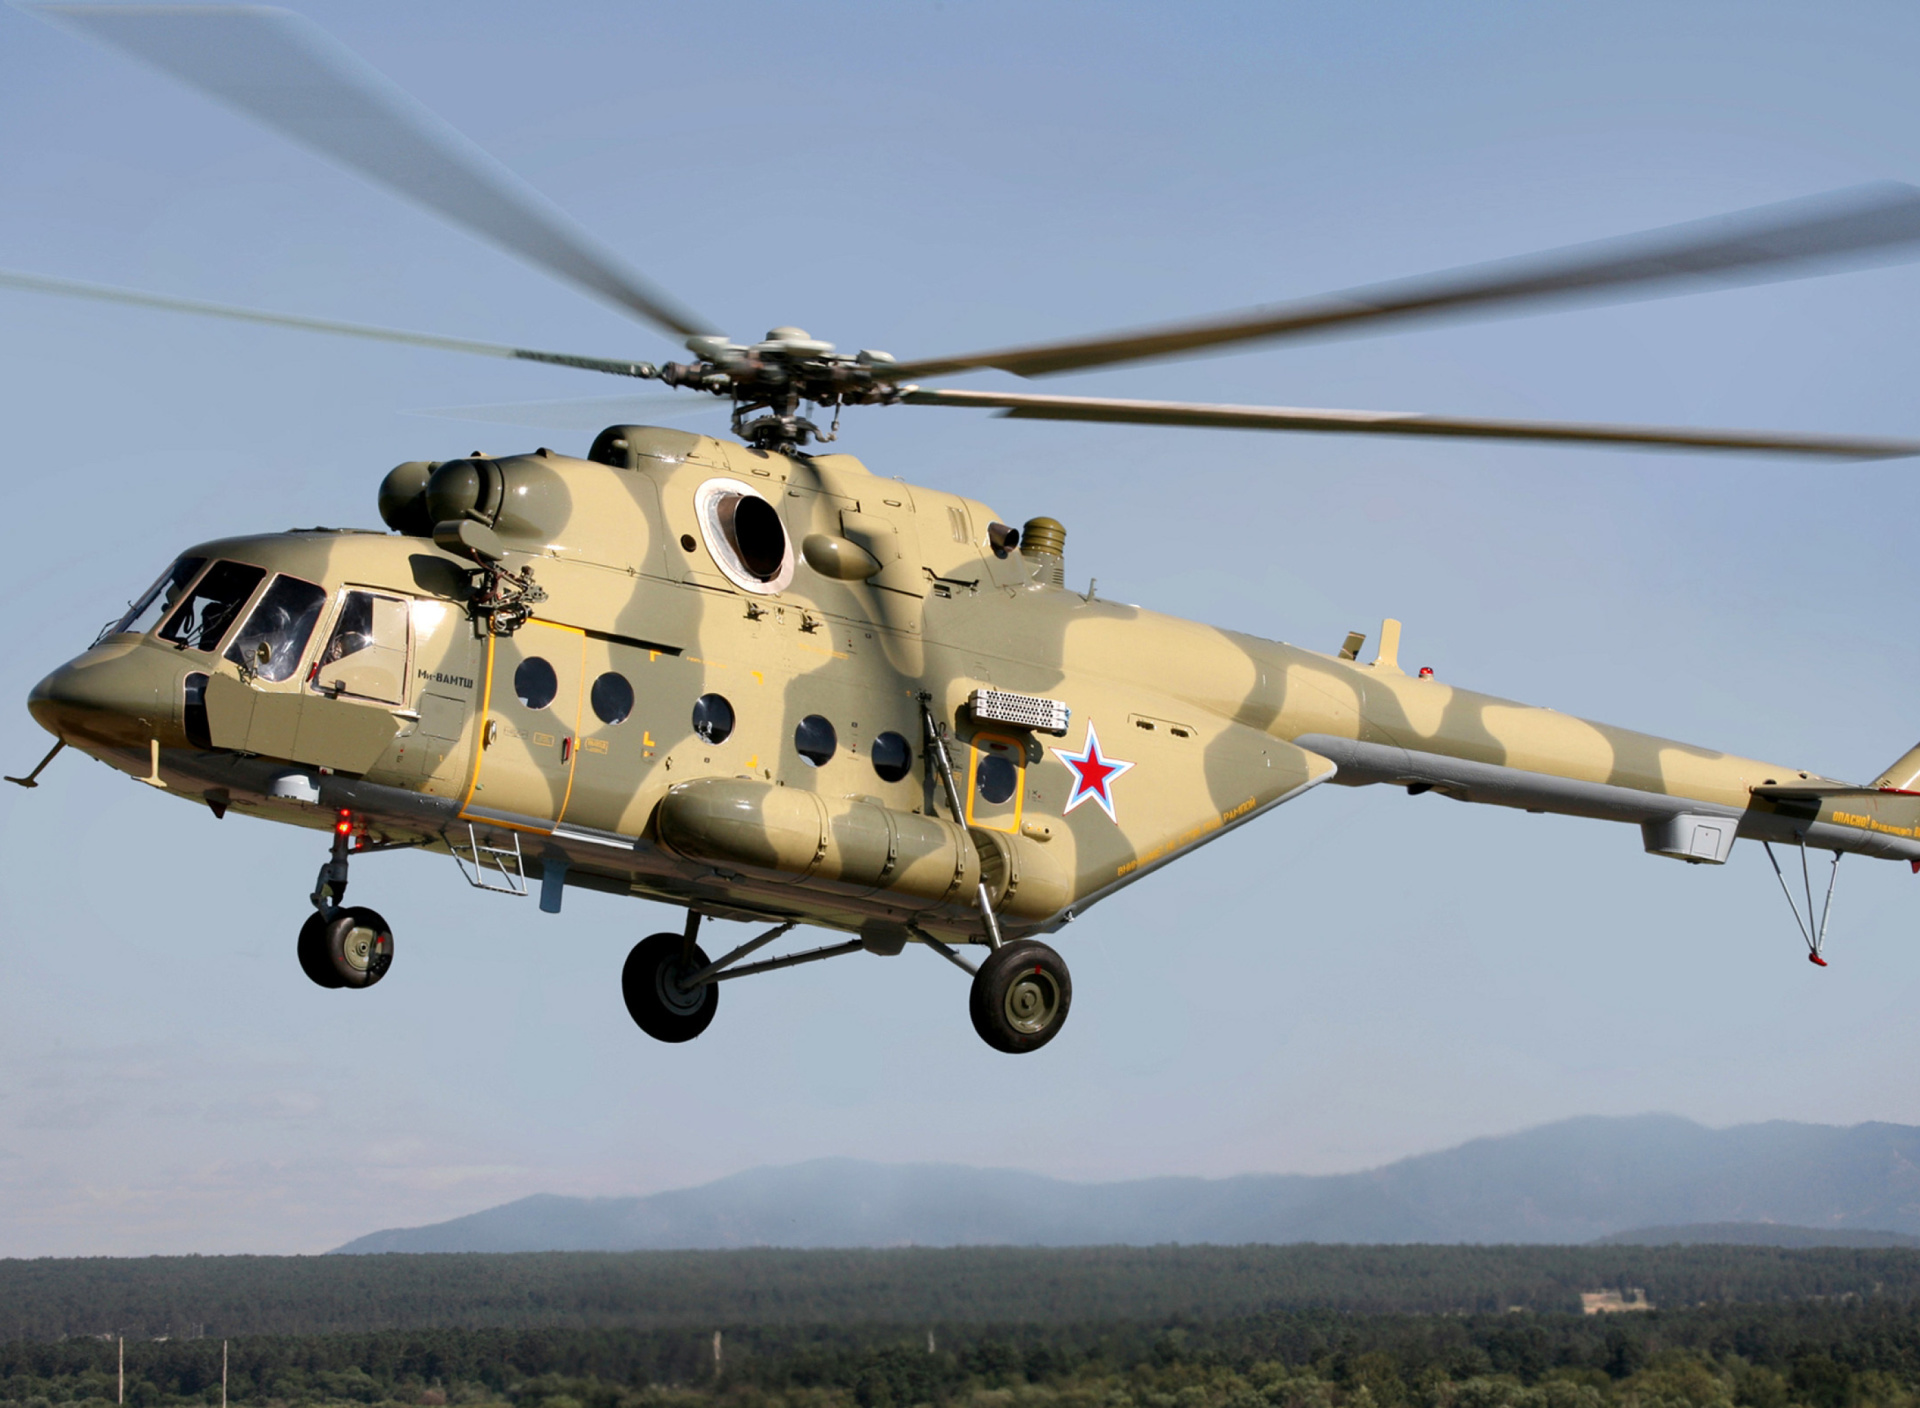 Mil Mi 17 Russian Helicopter wallpaper 1920x1408